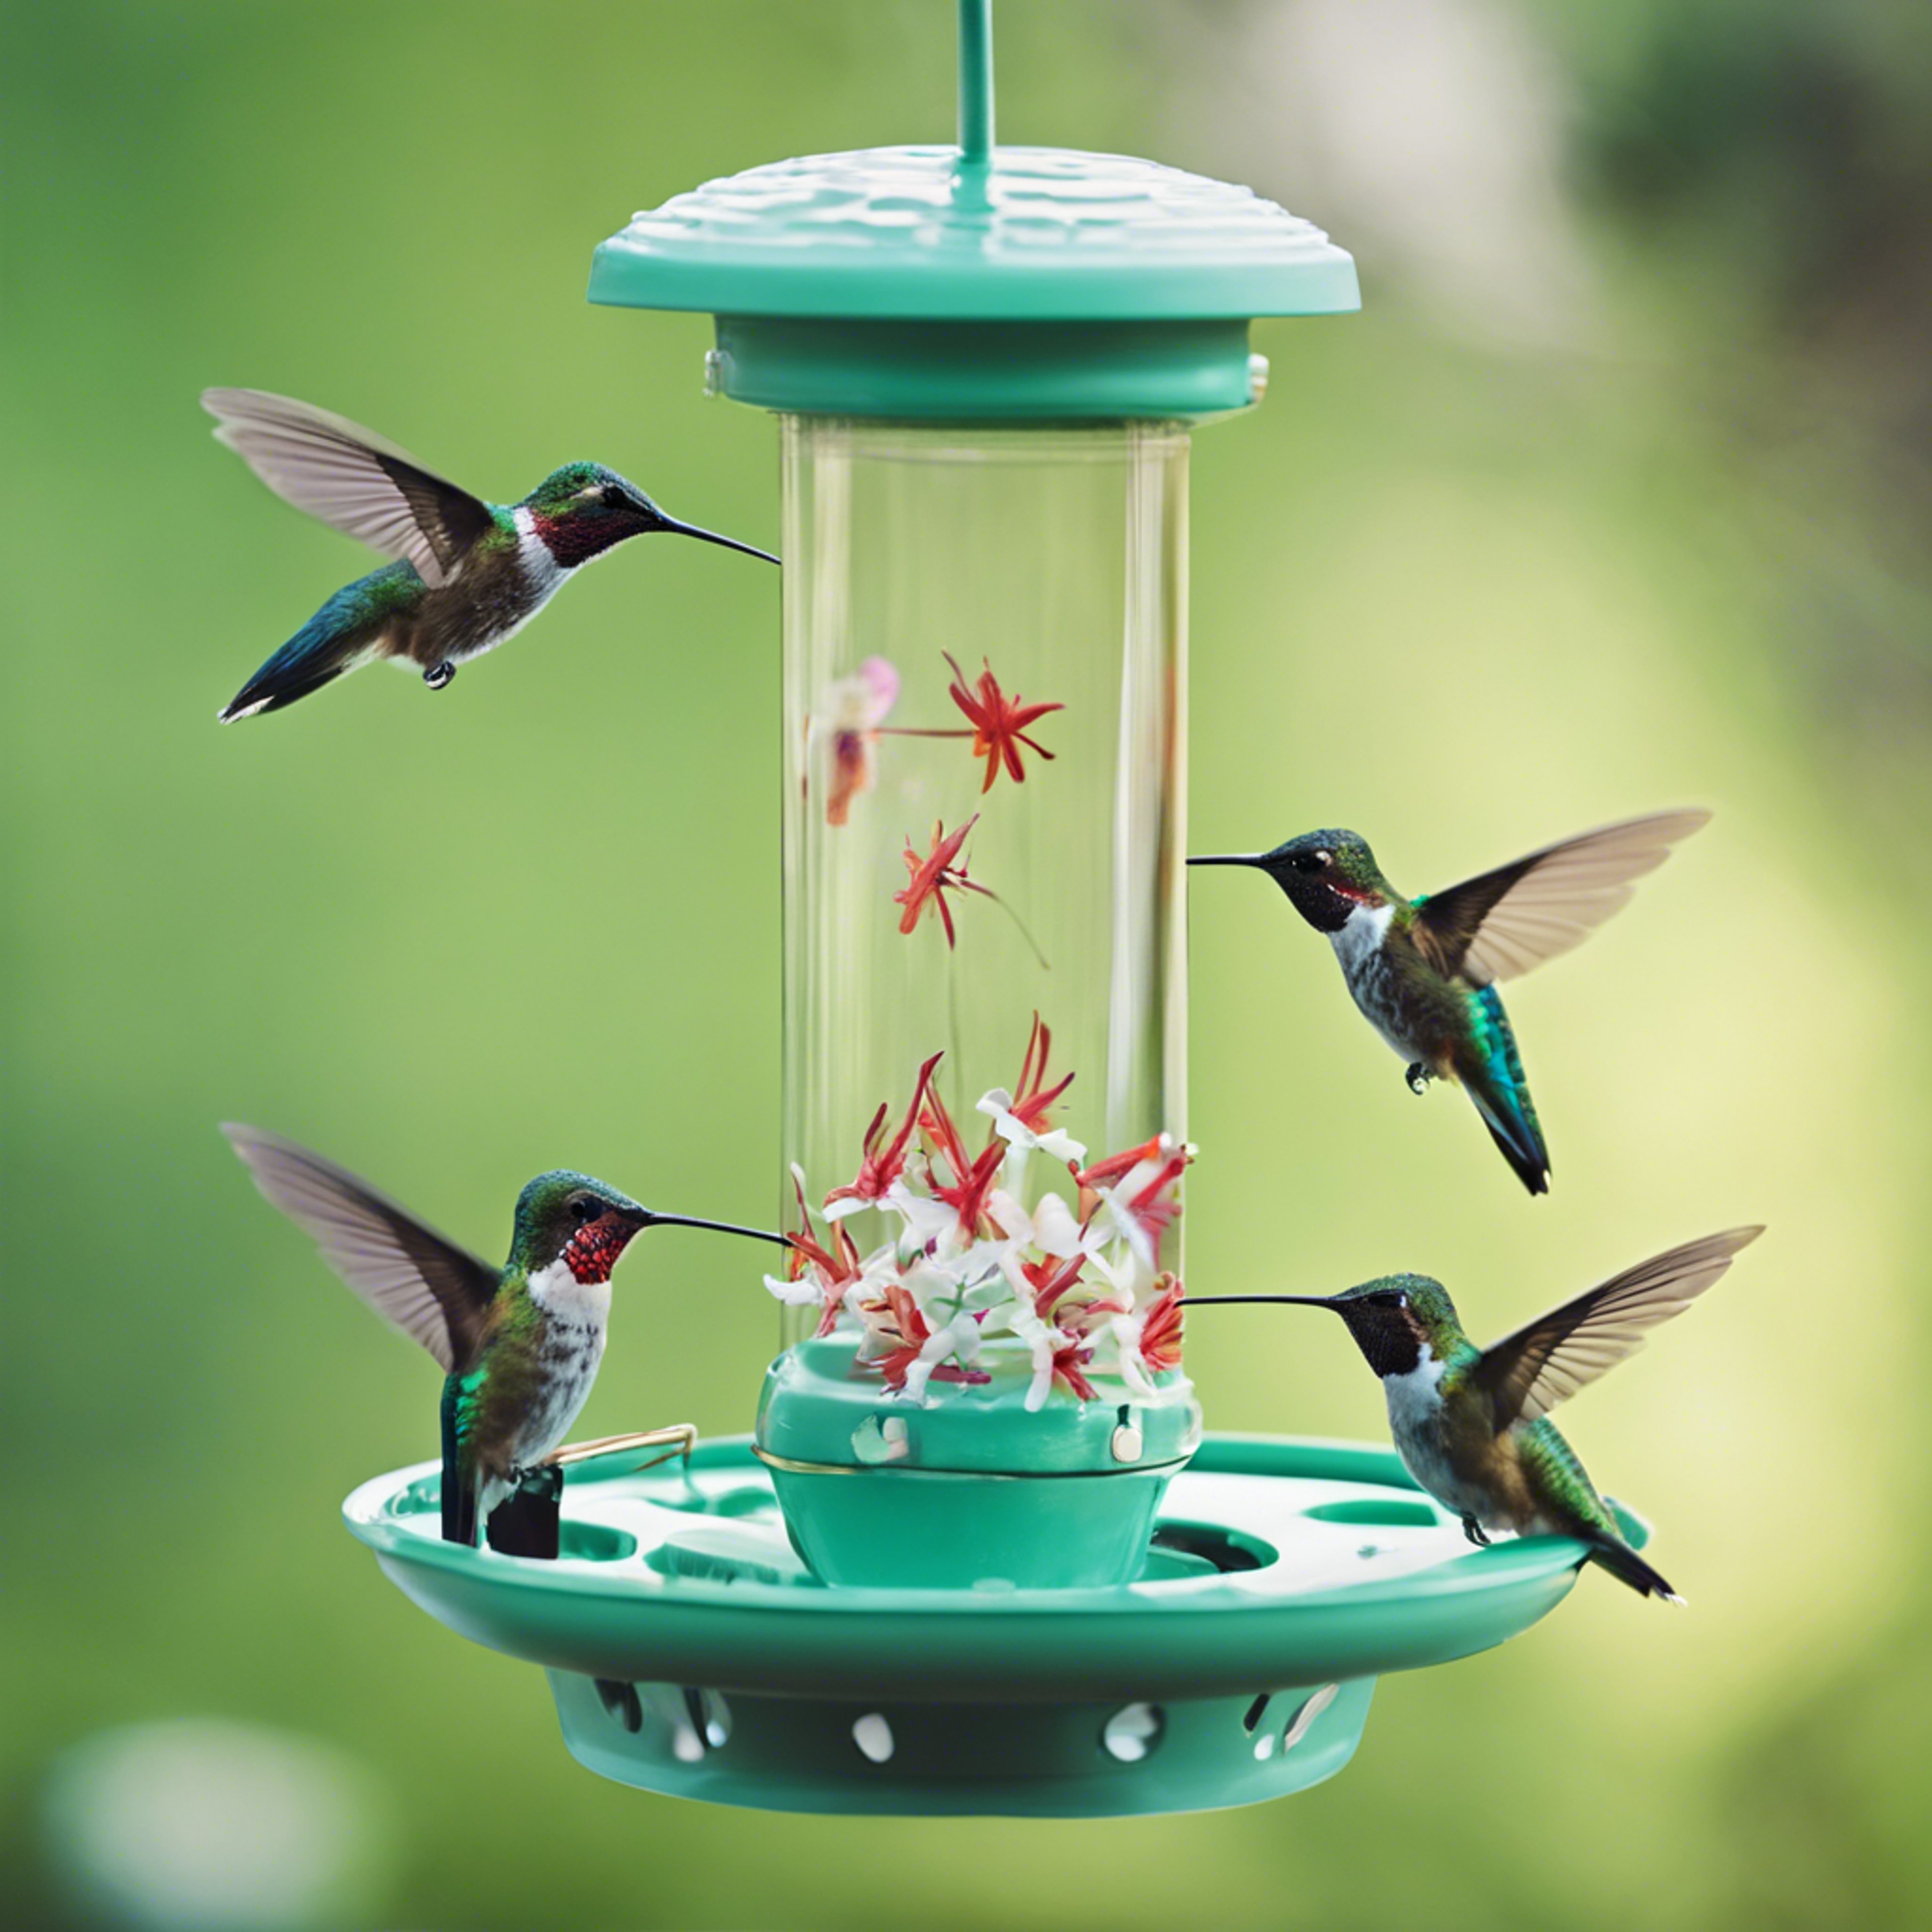 Several beautiful hummingbirds fluttering around a pastel green feeder filled with sweet nectar.壁紙[b76fe4647d45457e9fcd]